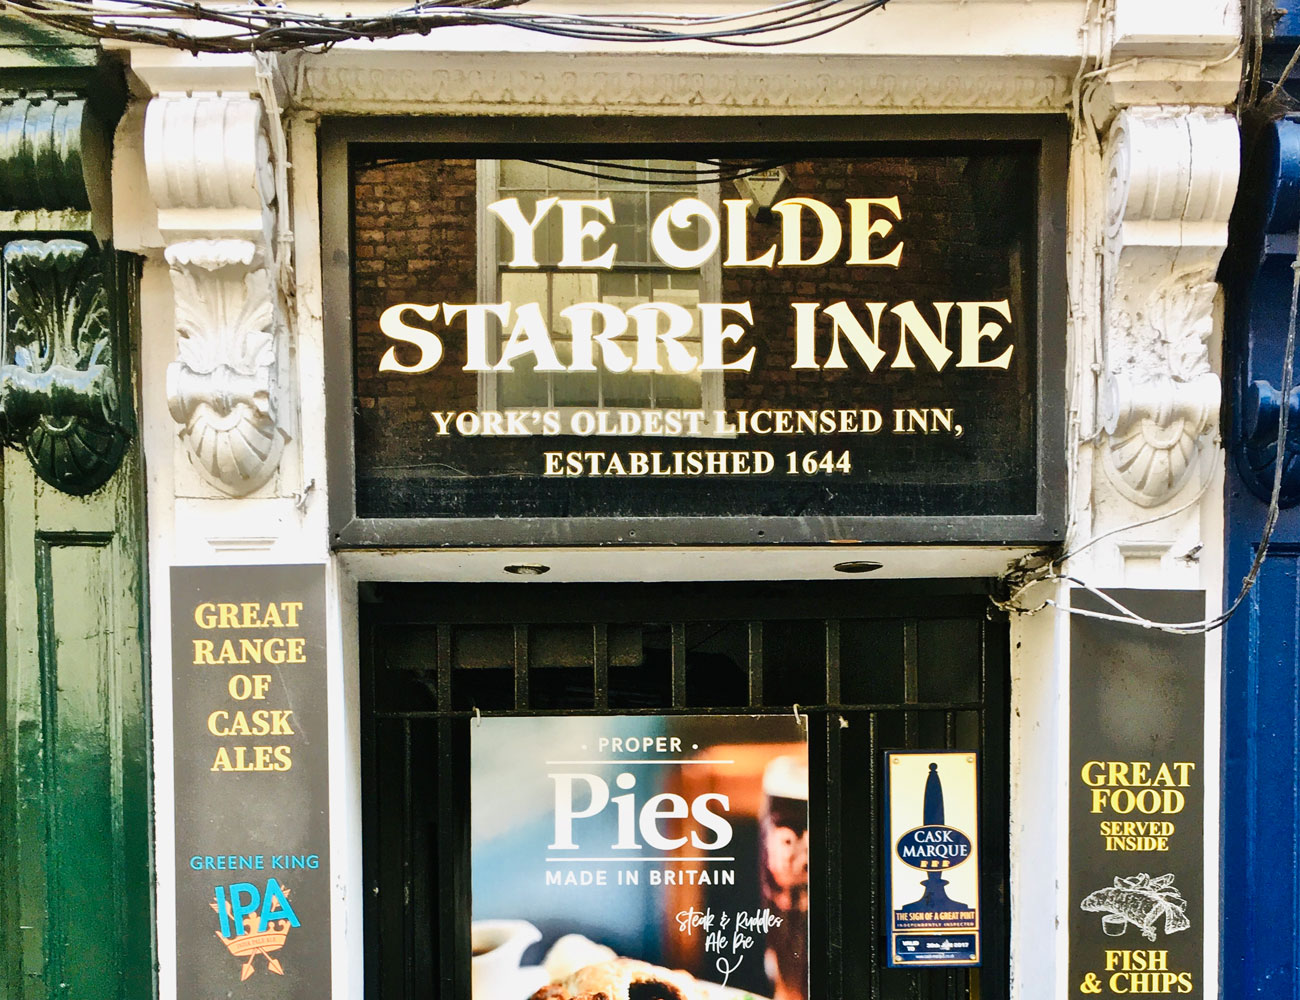 Ye Olde Starre Inne, Stonegate - One Of York's Most Famous And Historic Pubs